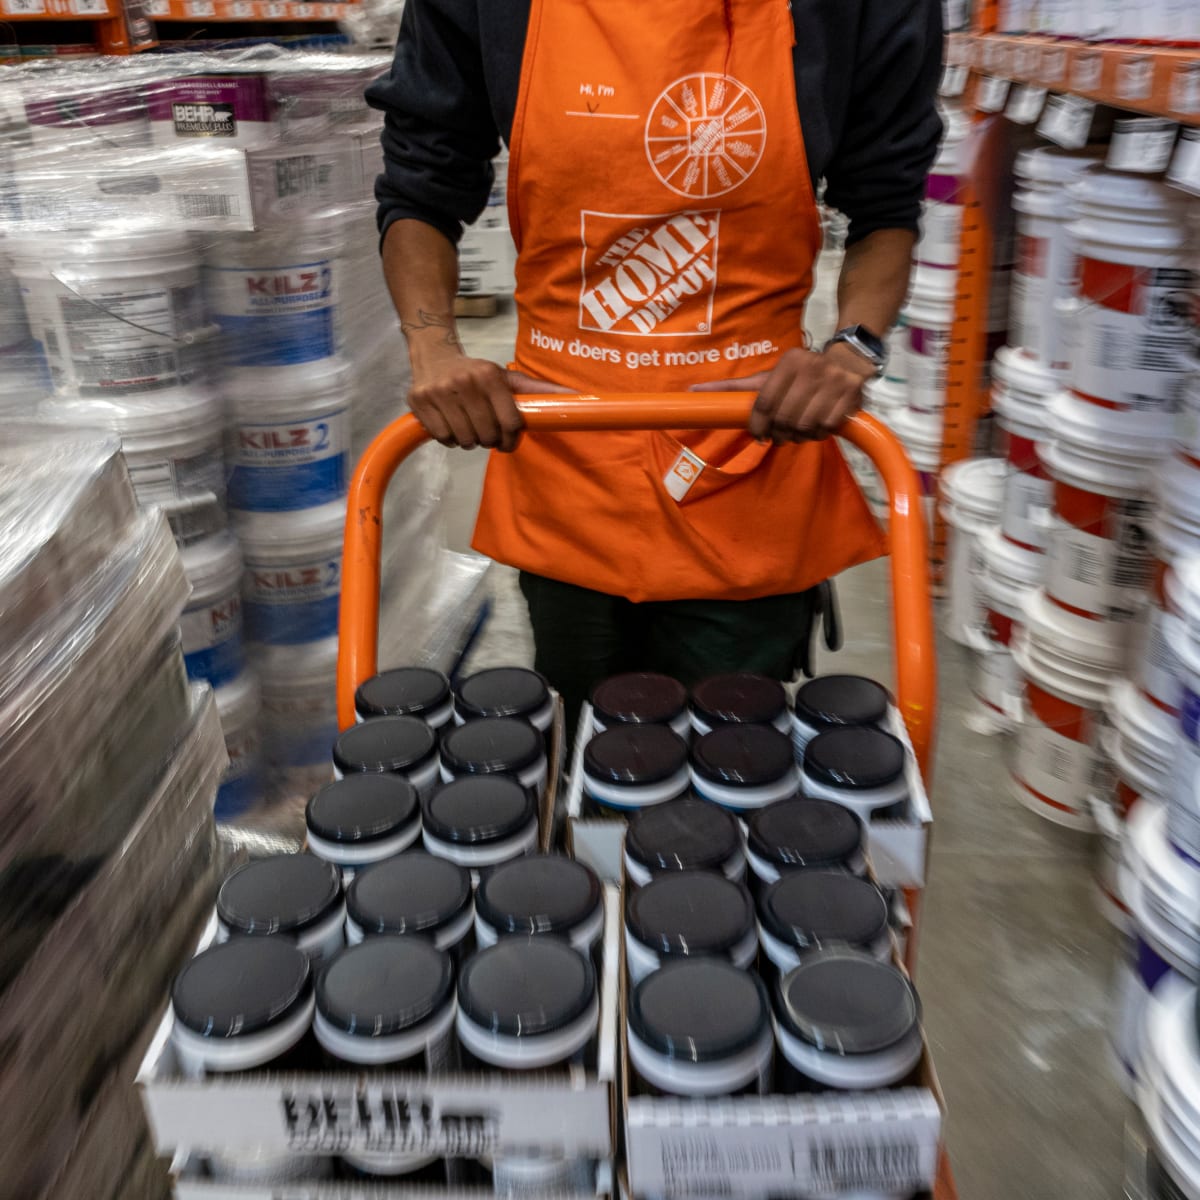 Home Depot starting pay rises to $15/hour amid nationwide labor